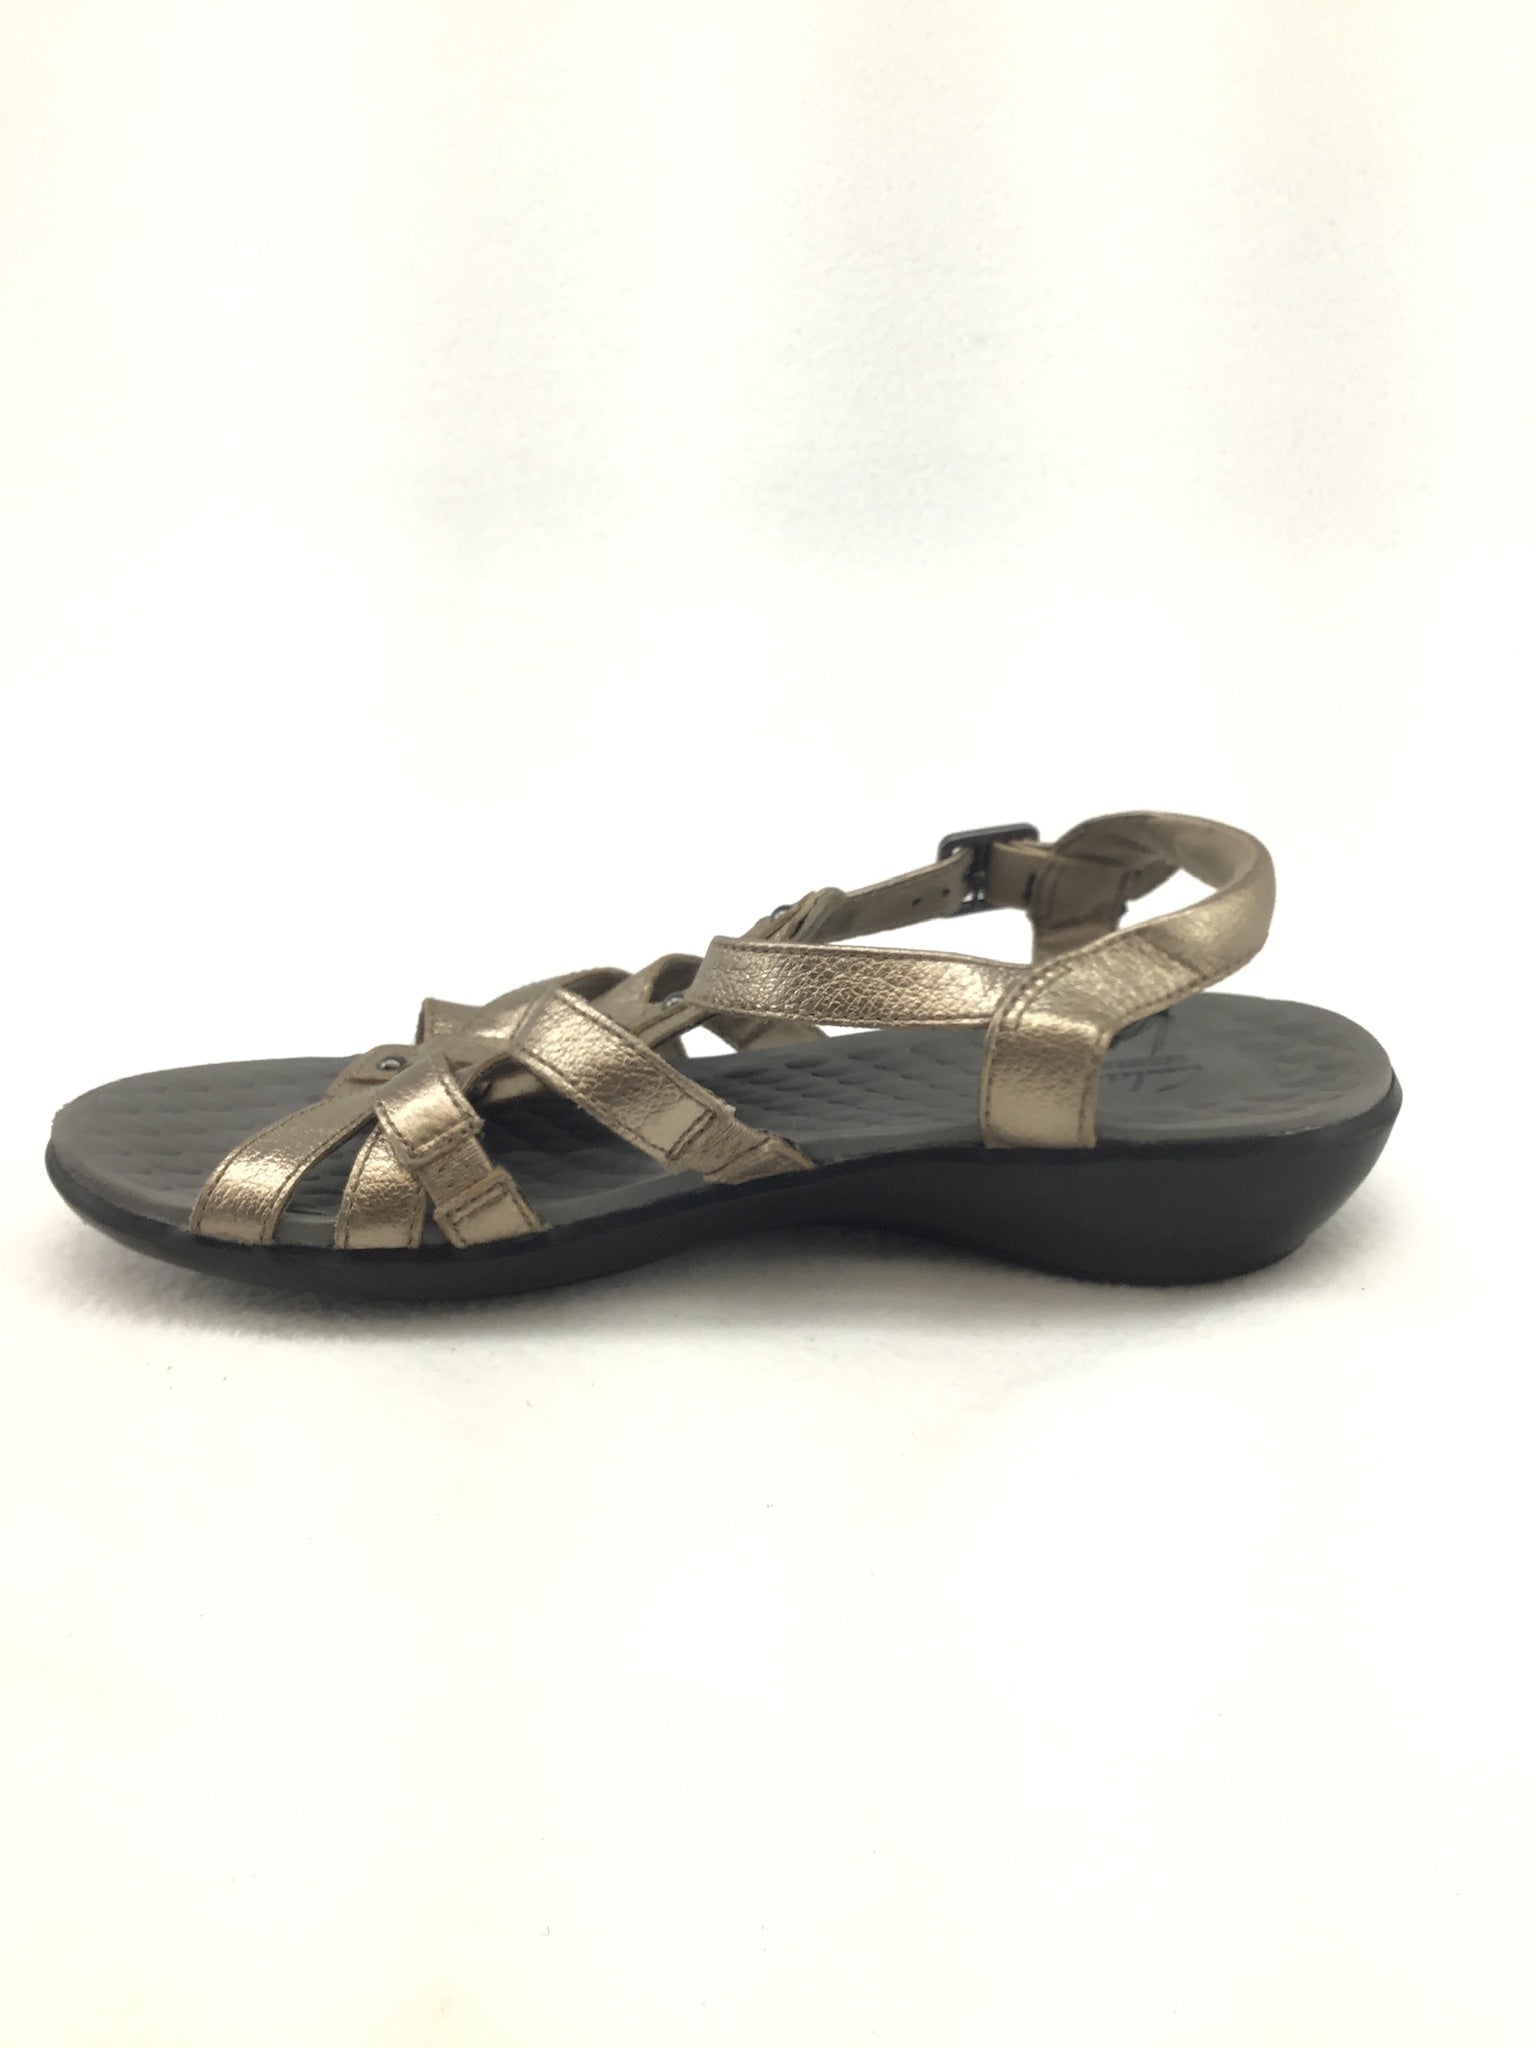 Clarks Strappy Sandals Size 9.5